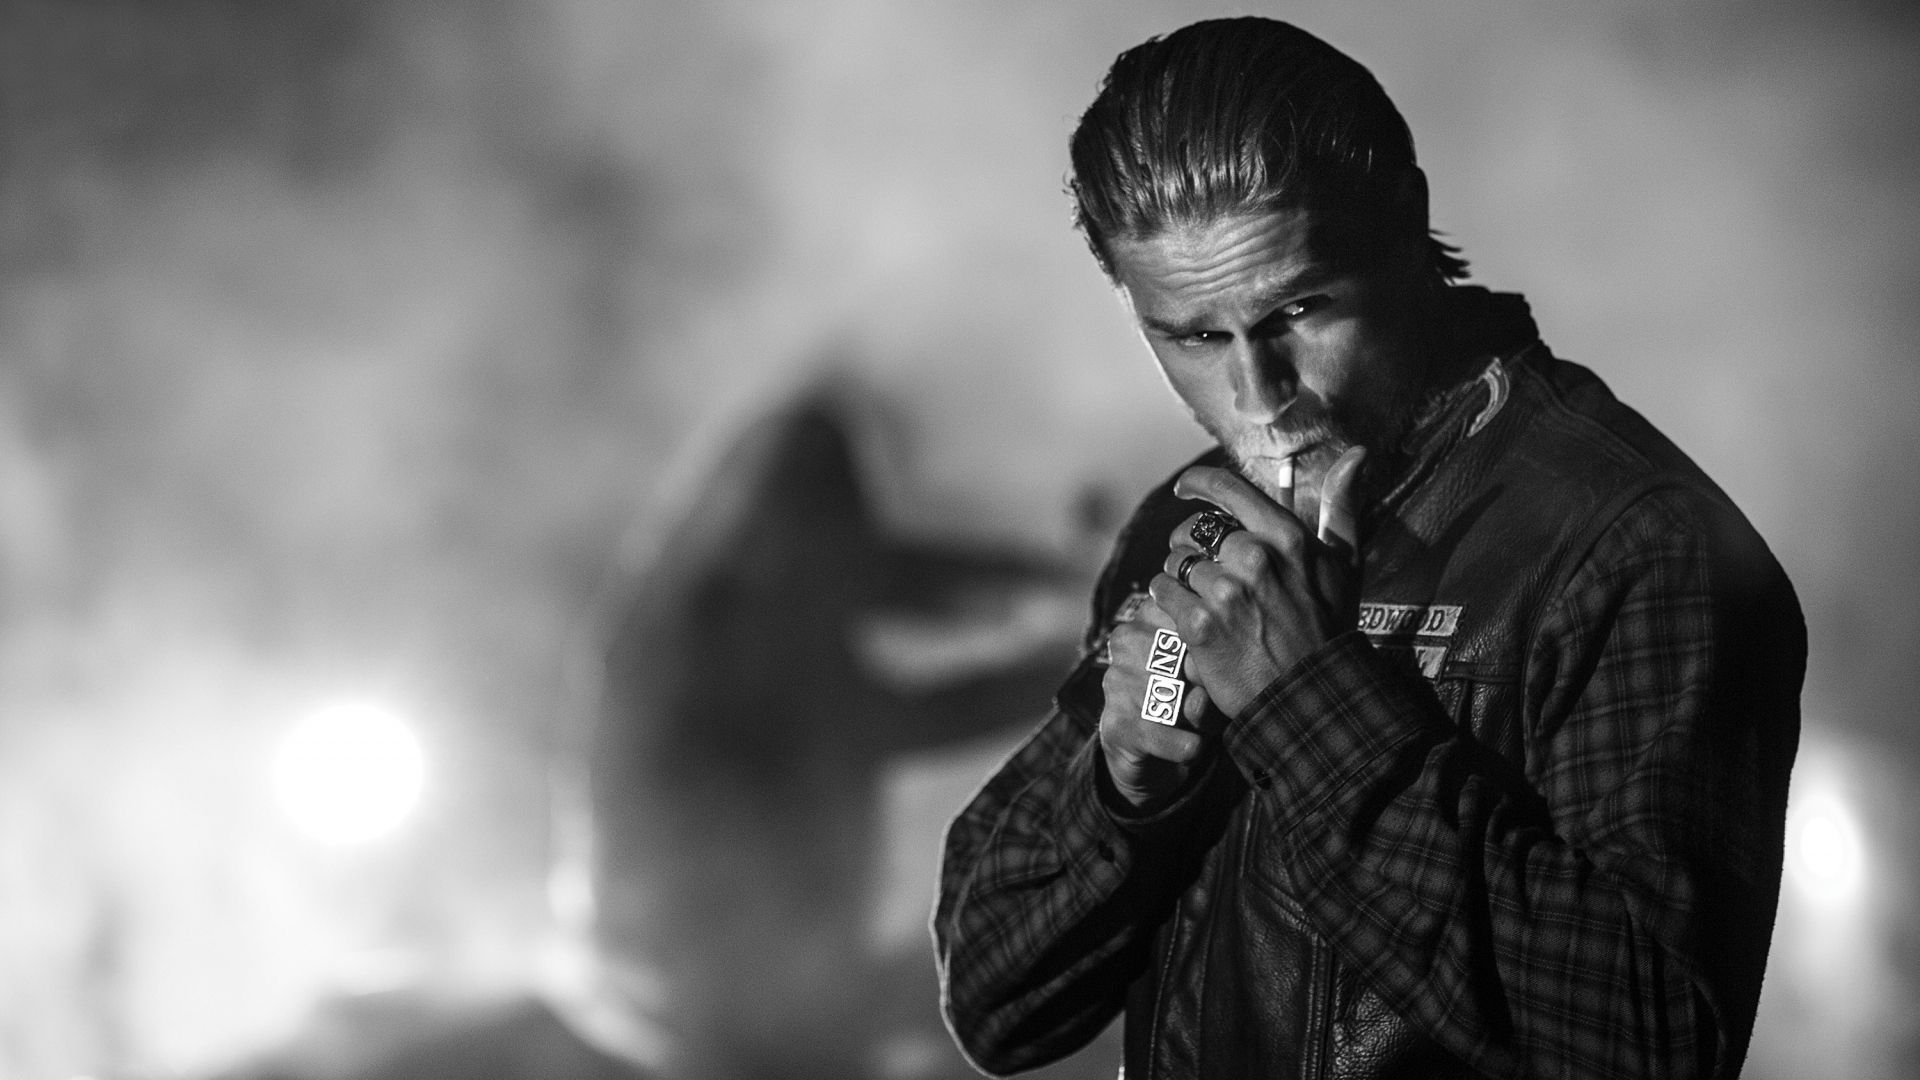 Full HD 1080p Sons of anarchy Wallpapers HD, Desktop Backgrounds